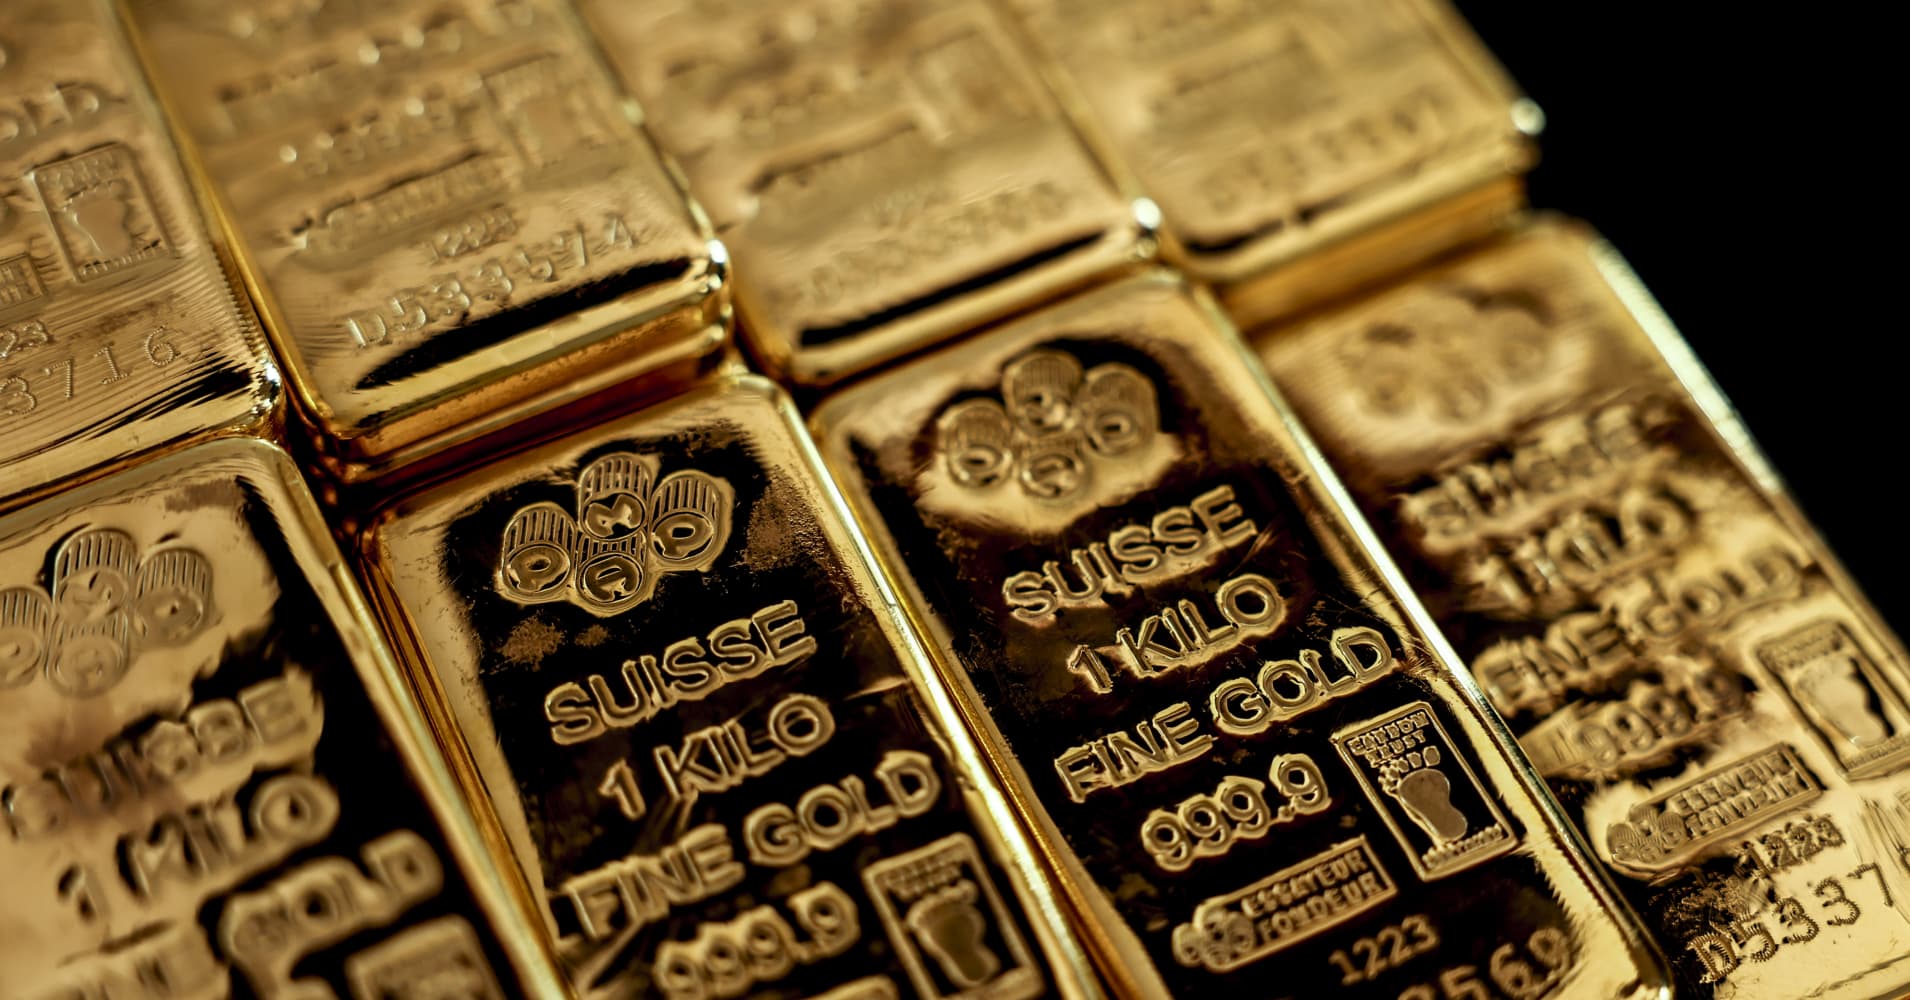 gold is shining ‘bright like a diamond’ and could hit $3,000, says citi